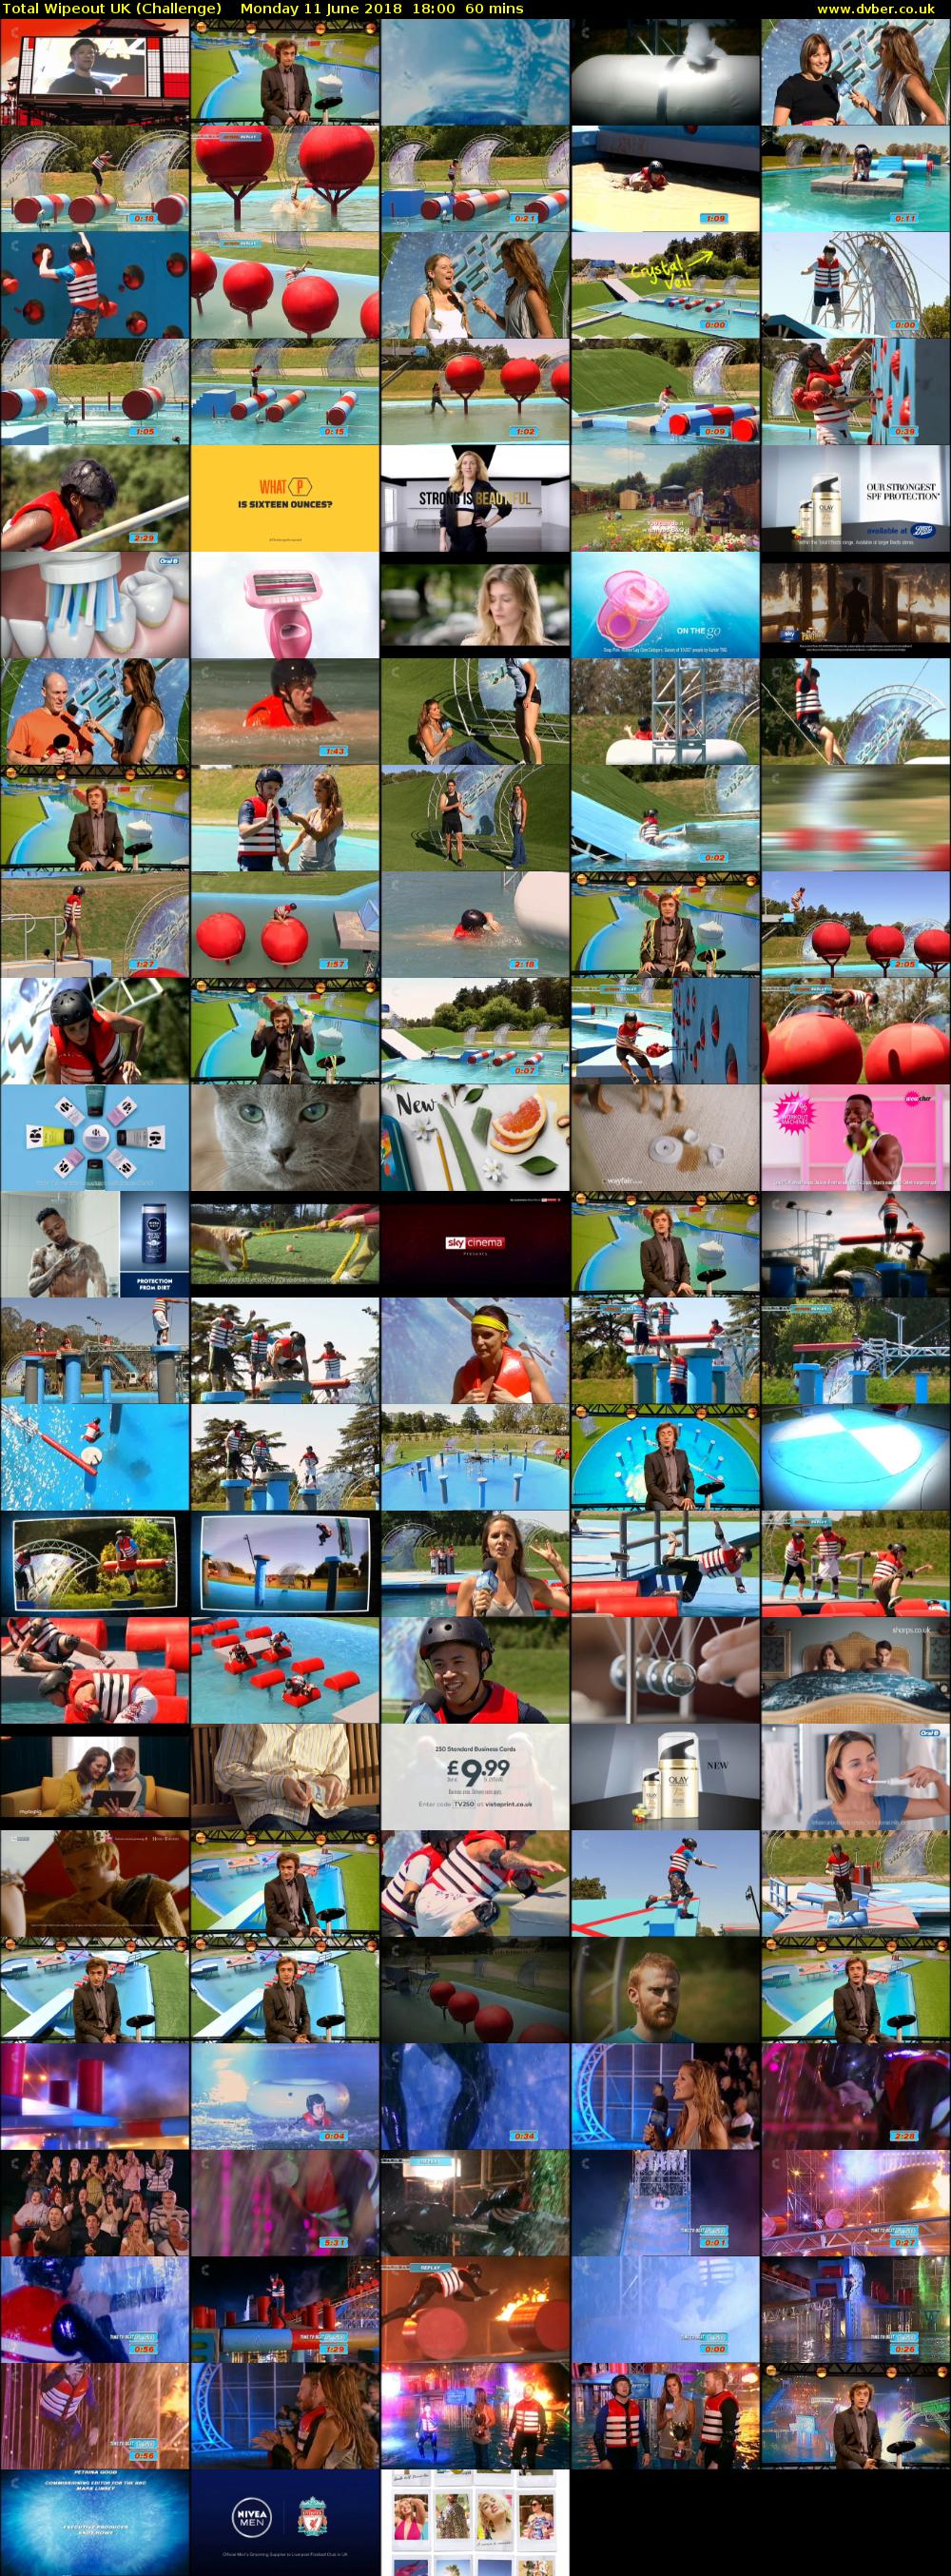 Total Wipeout UK (Challenge) Monday 11 June 2018 18:00 - 19:00